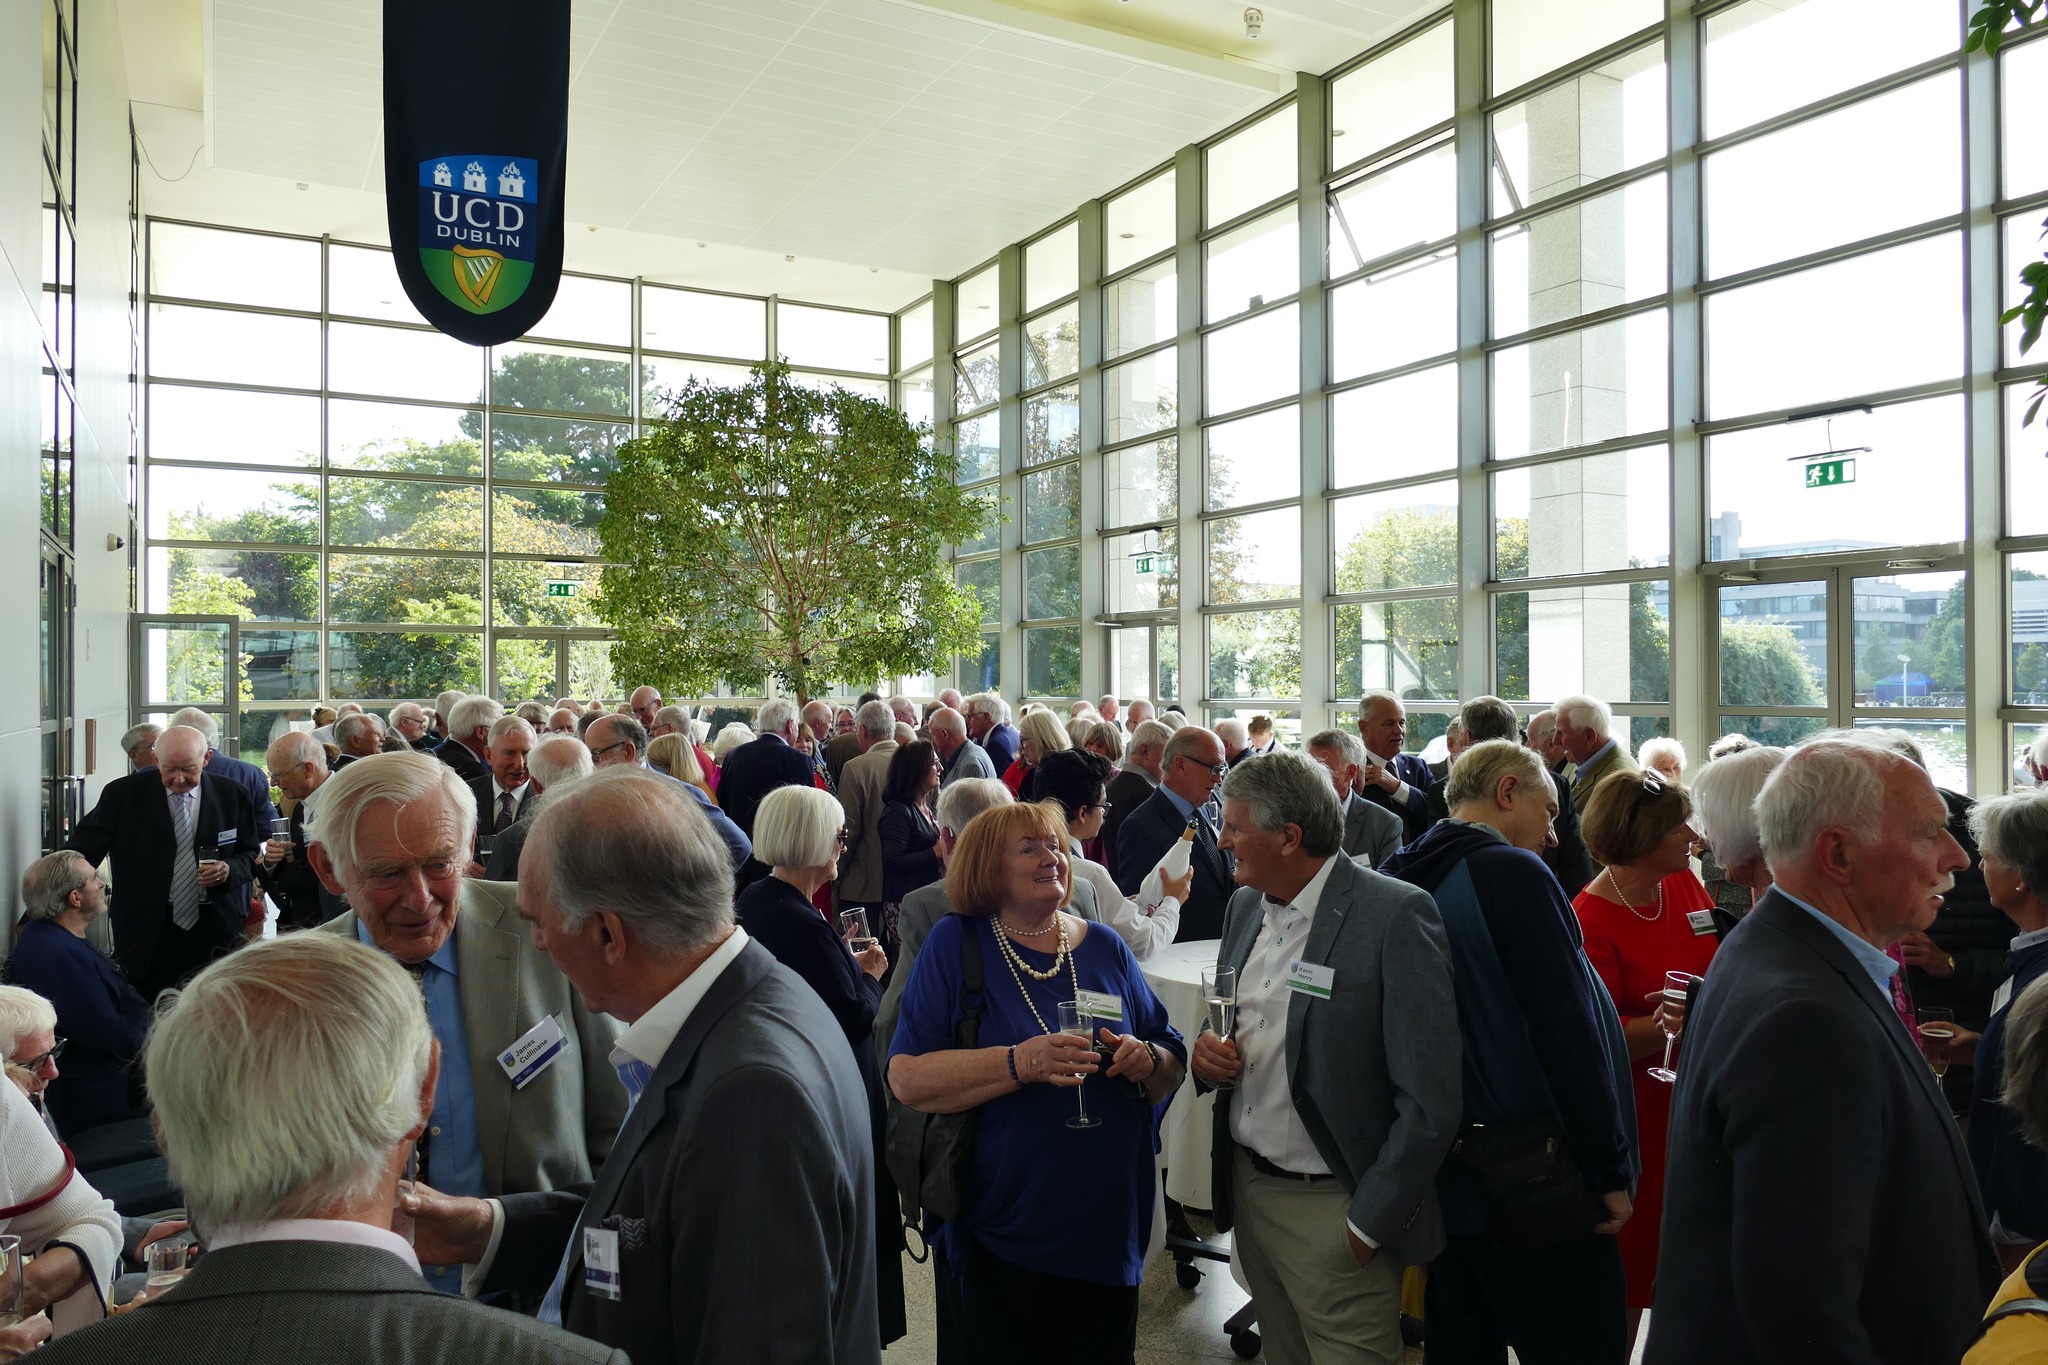 Alumni get together for their milestone reunion at the Belfield campus